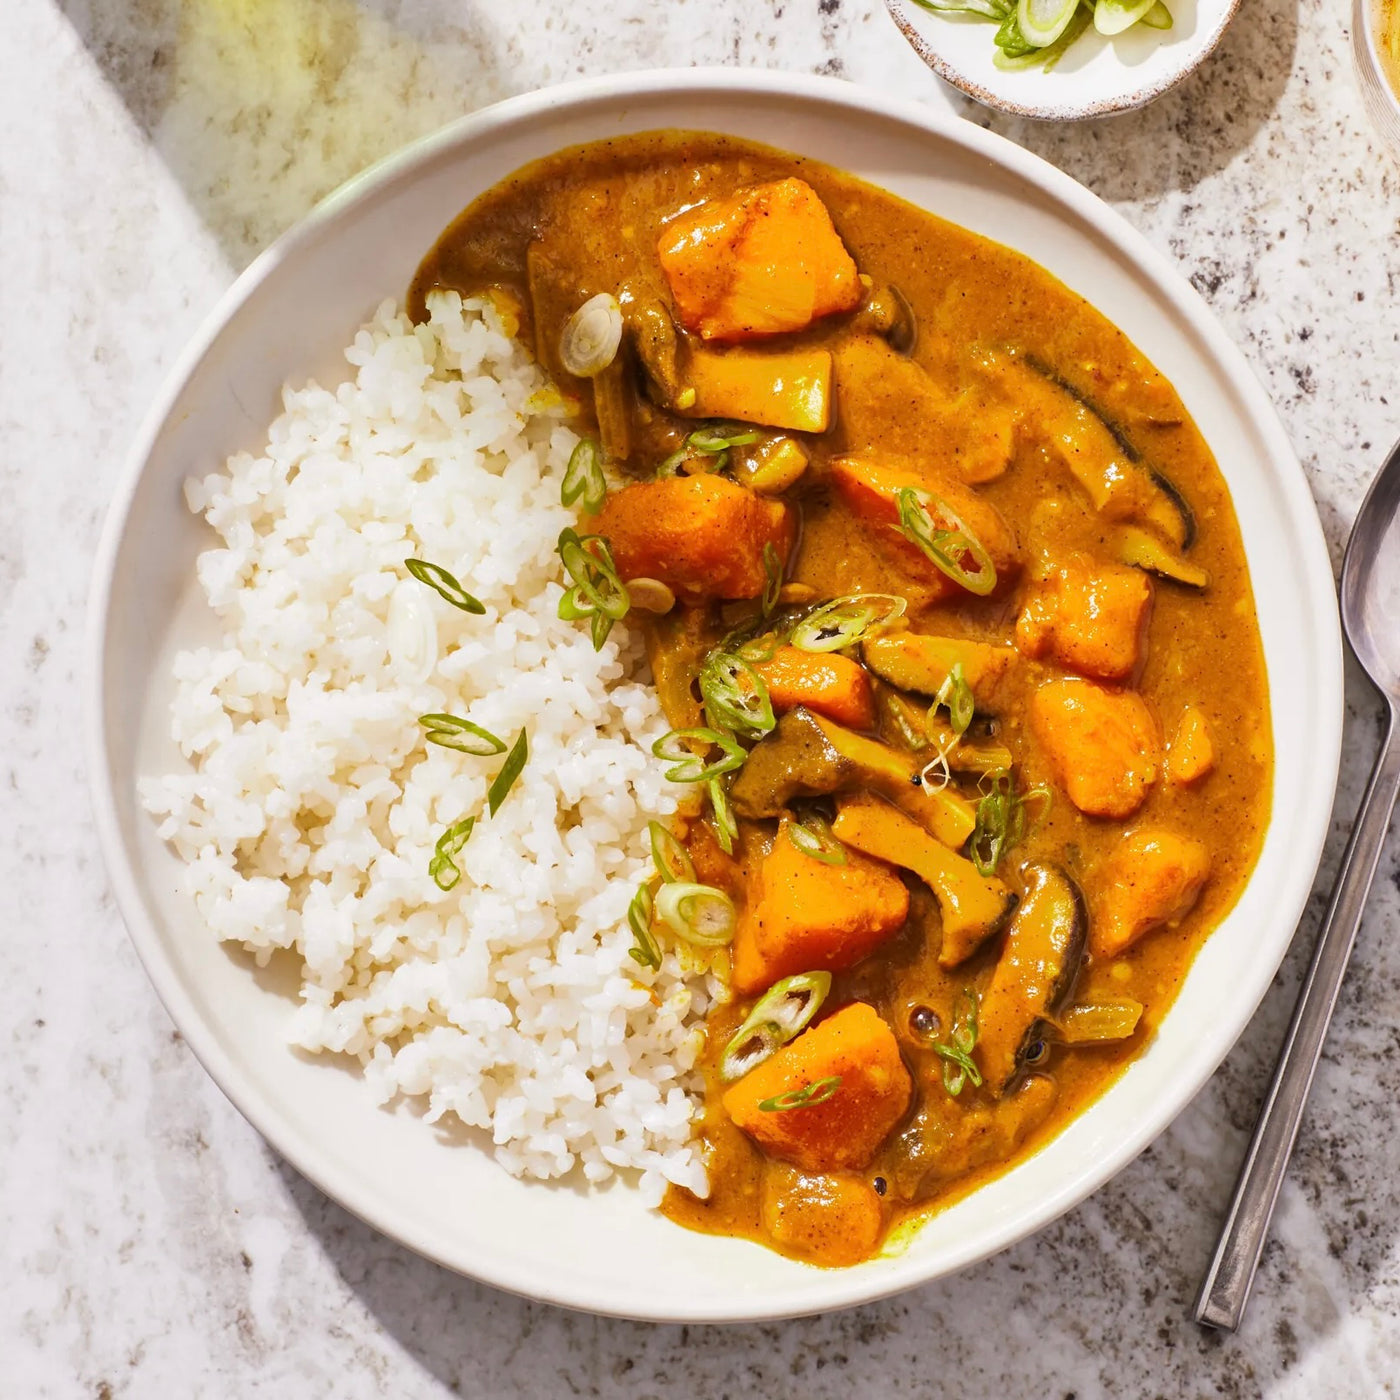 Plant-based Artisanal Japanese Curry Chicken | Ready to eat | 250g